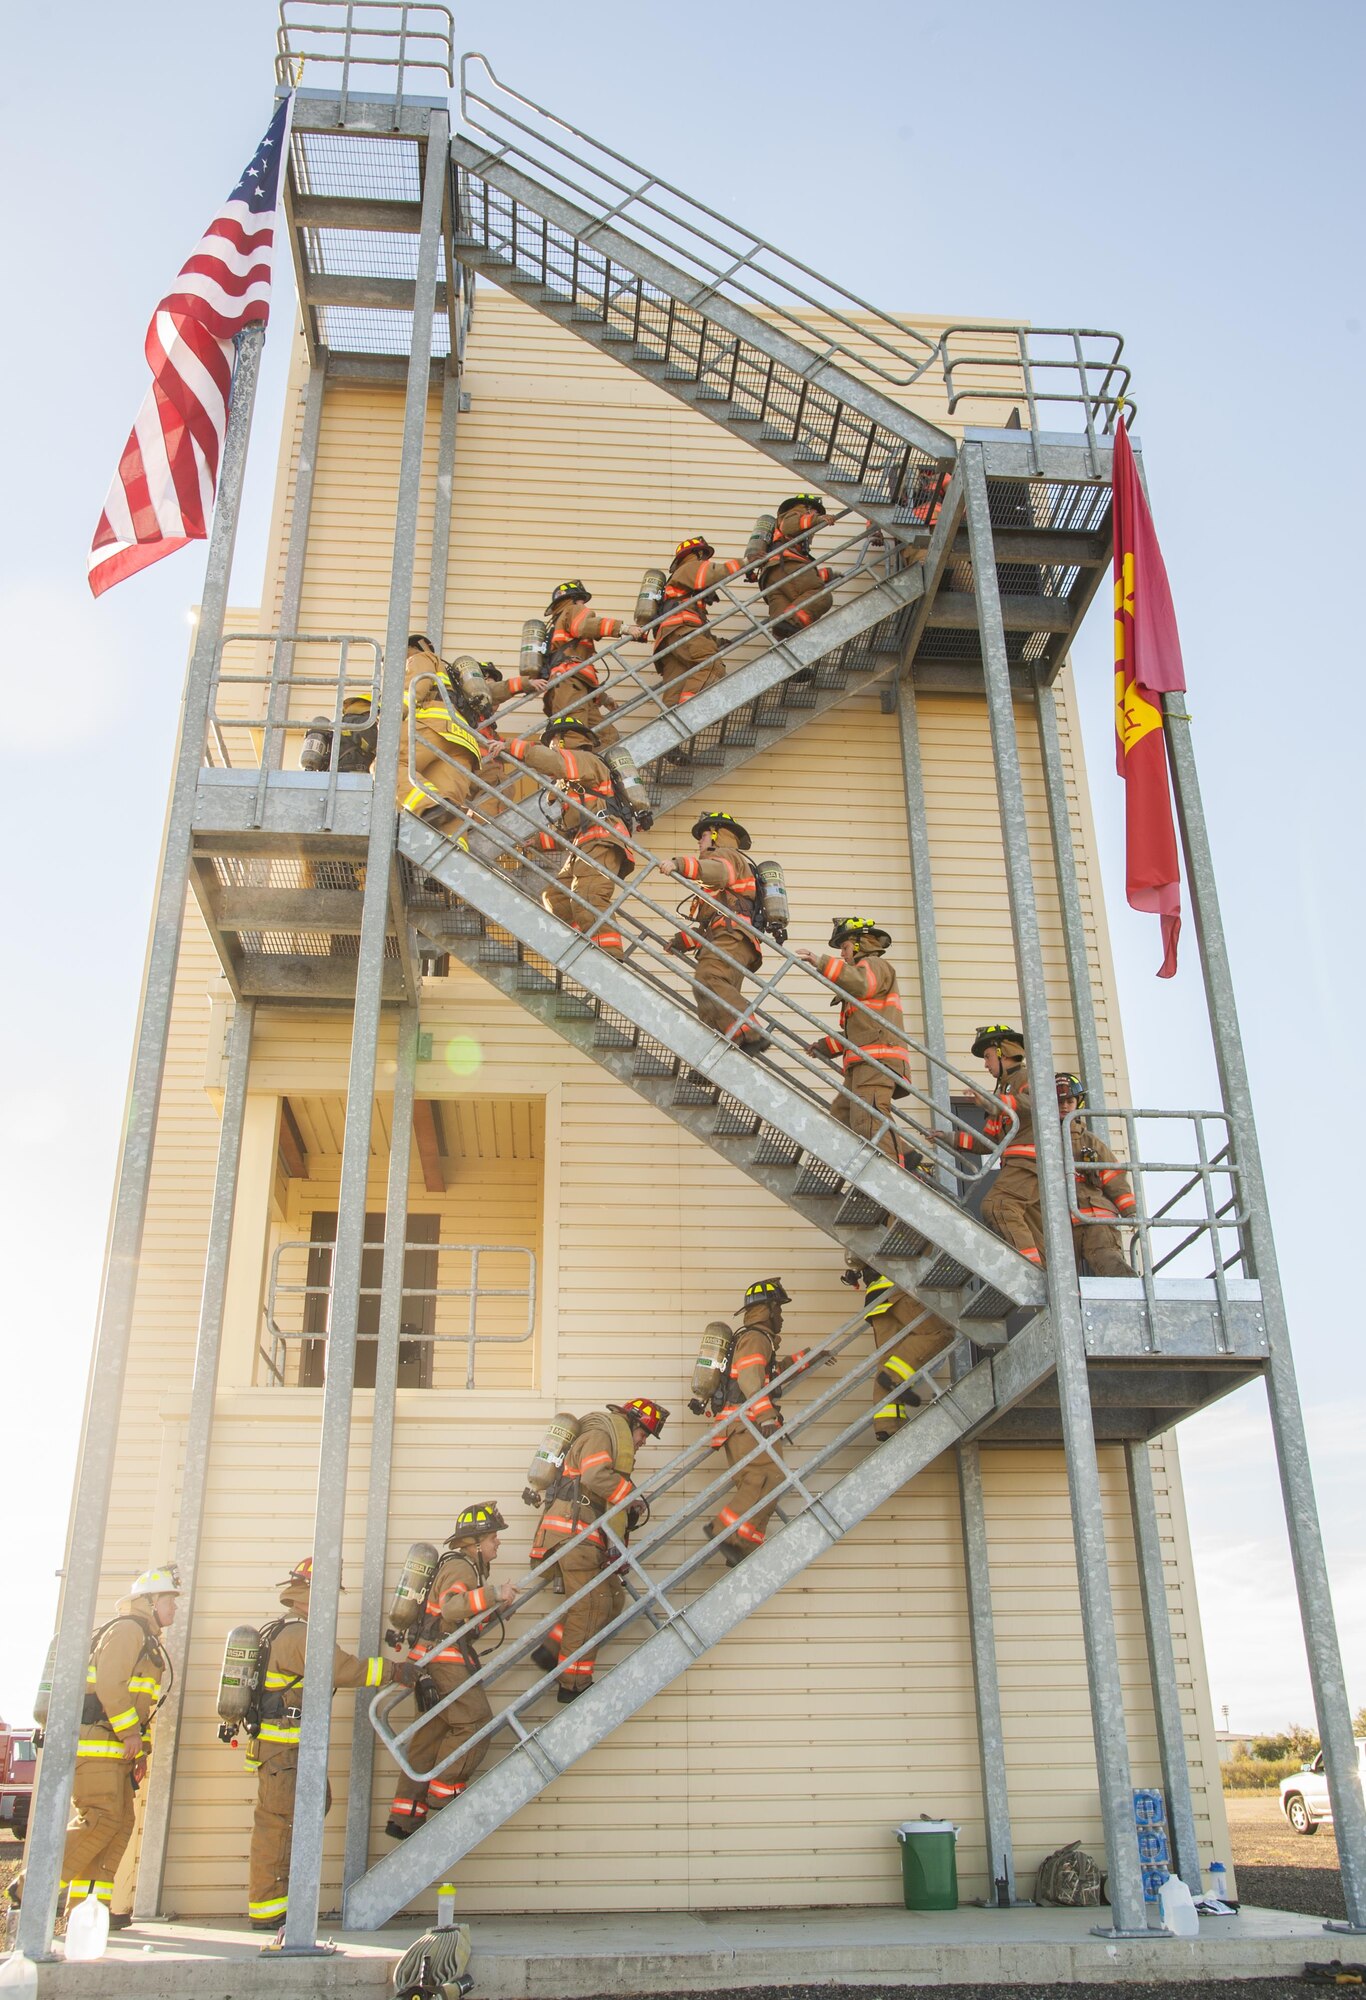 Firemen from the 5th Civil Engineer Squadron climb stairs during their 9/11 memorial climb at Minot Air Force Base, N.D., Sept. 11, 2016. In honor of the emergency responders who lost their lives in the terrorist attacks of 9/11, the Minot AFB fire department climbed 110 stories, the equivalent of what the twin towers had prior to the attack. (U.S. Air Force photo/Airman 1st Class Christian Sullivan)